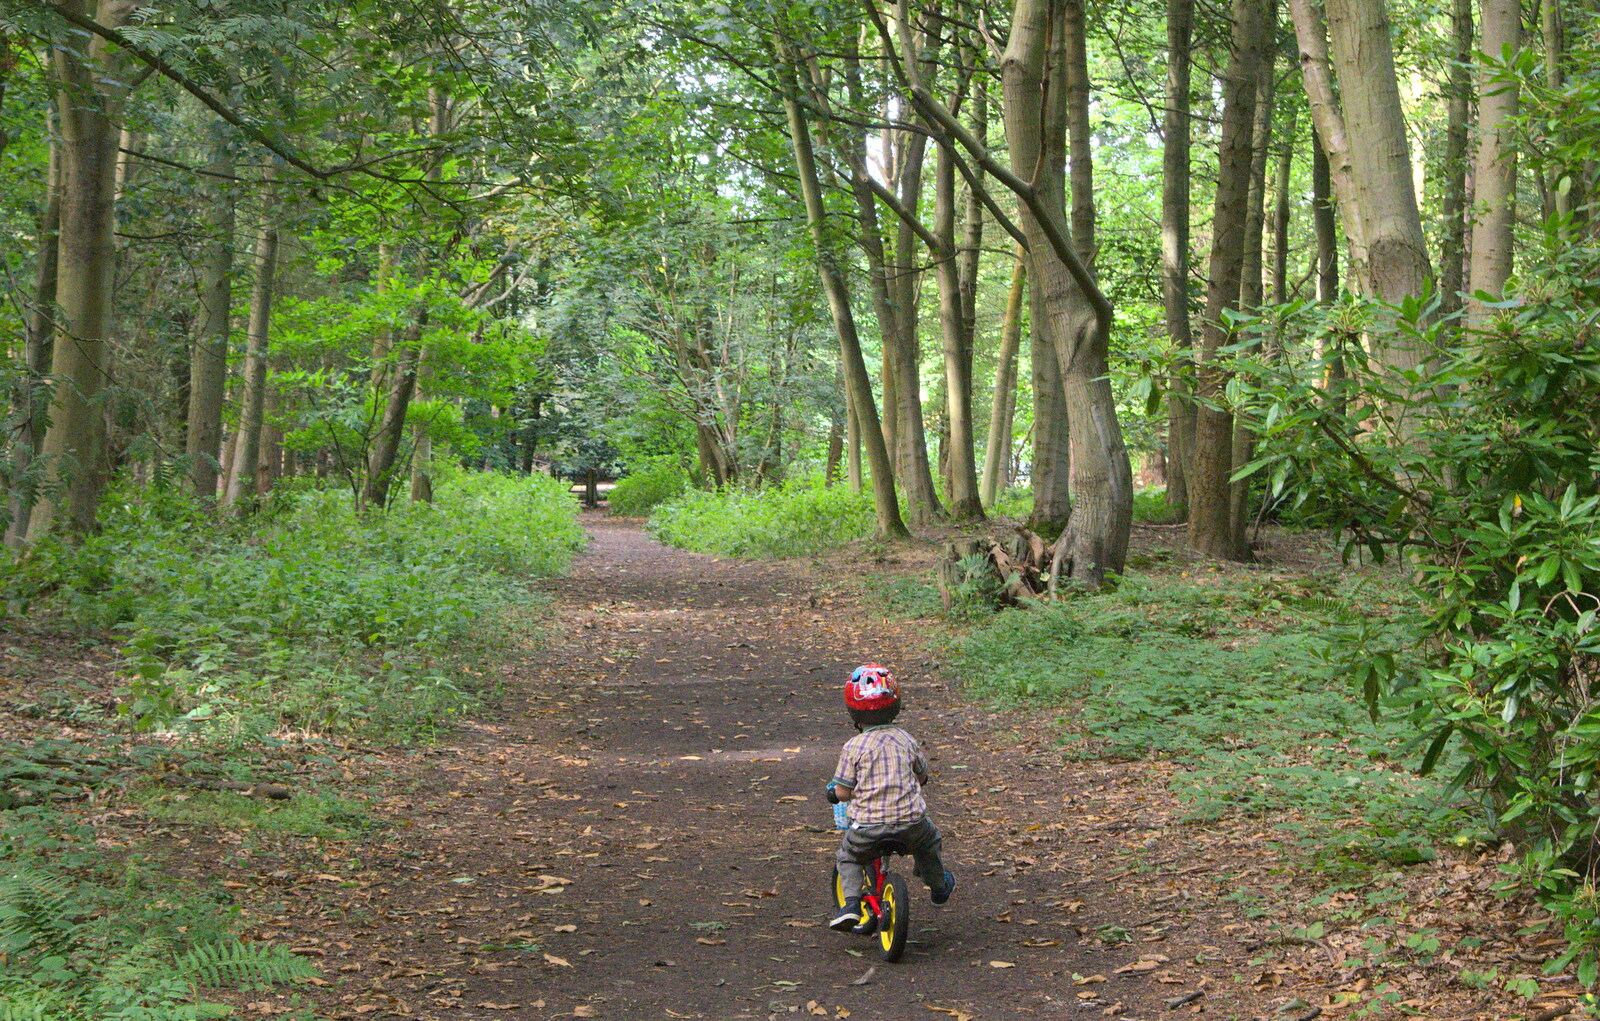 Harry on his balance bike from The Archaeology of Dunwich: A Camping Trip, Dunwich, Suffolk - 1st August 2015